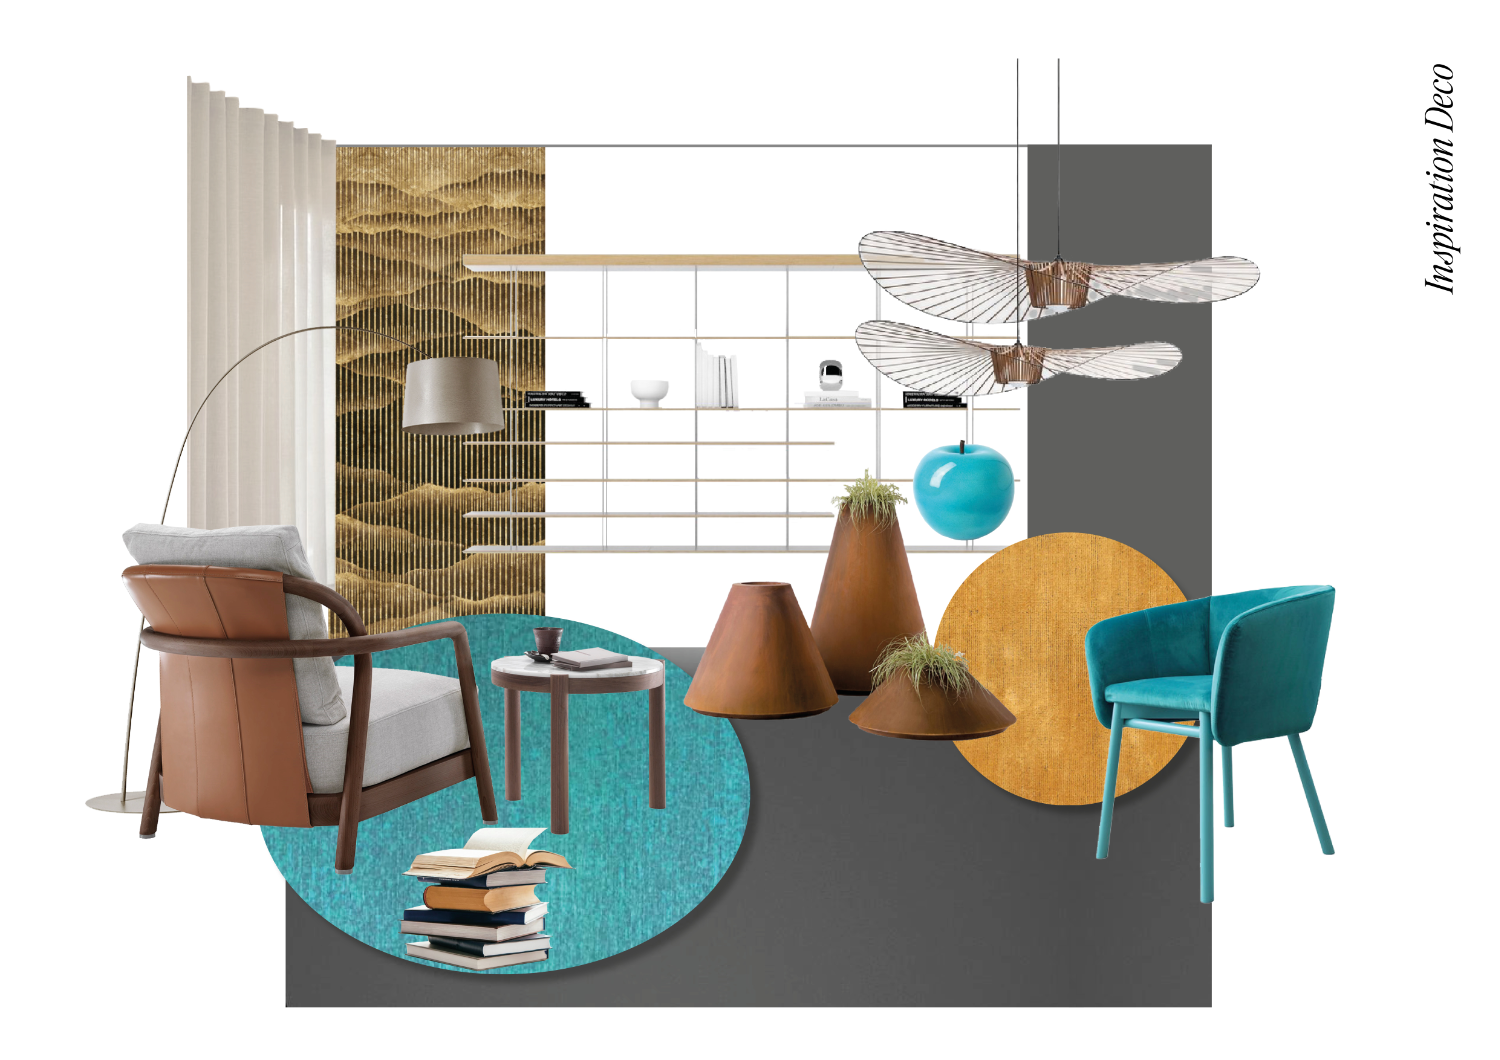 Selection of furniture, lighting and accessories suggested during an interior design consultation by Elles Interior Design.